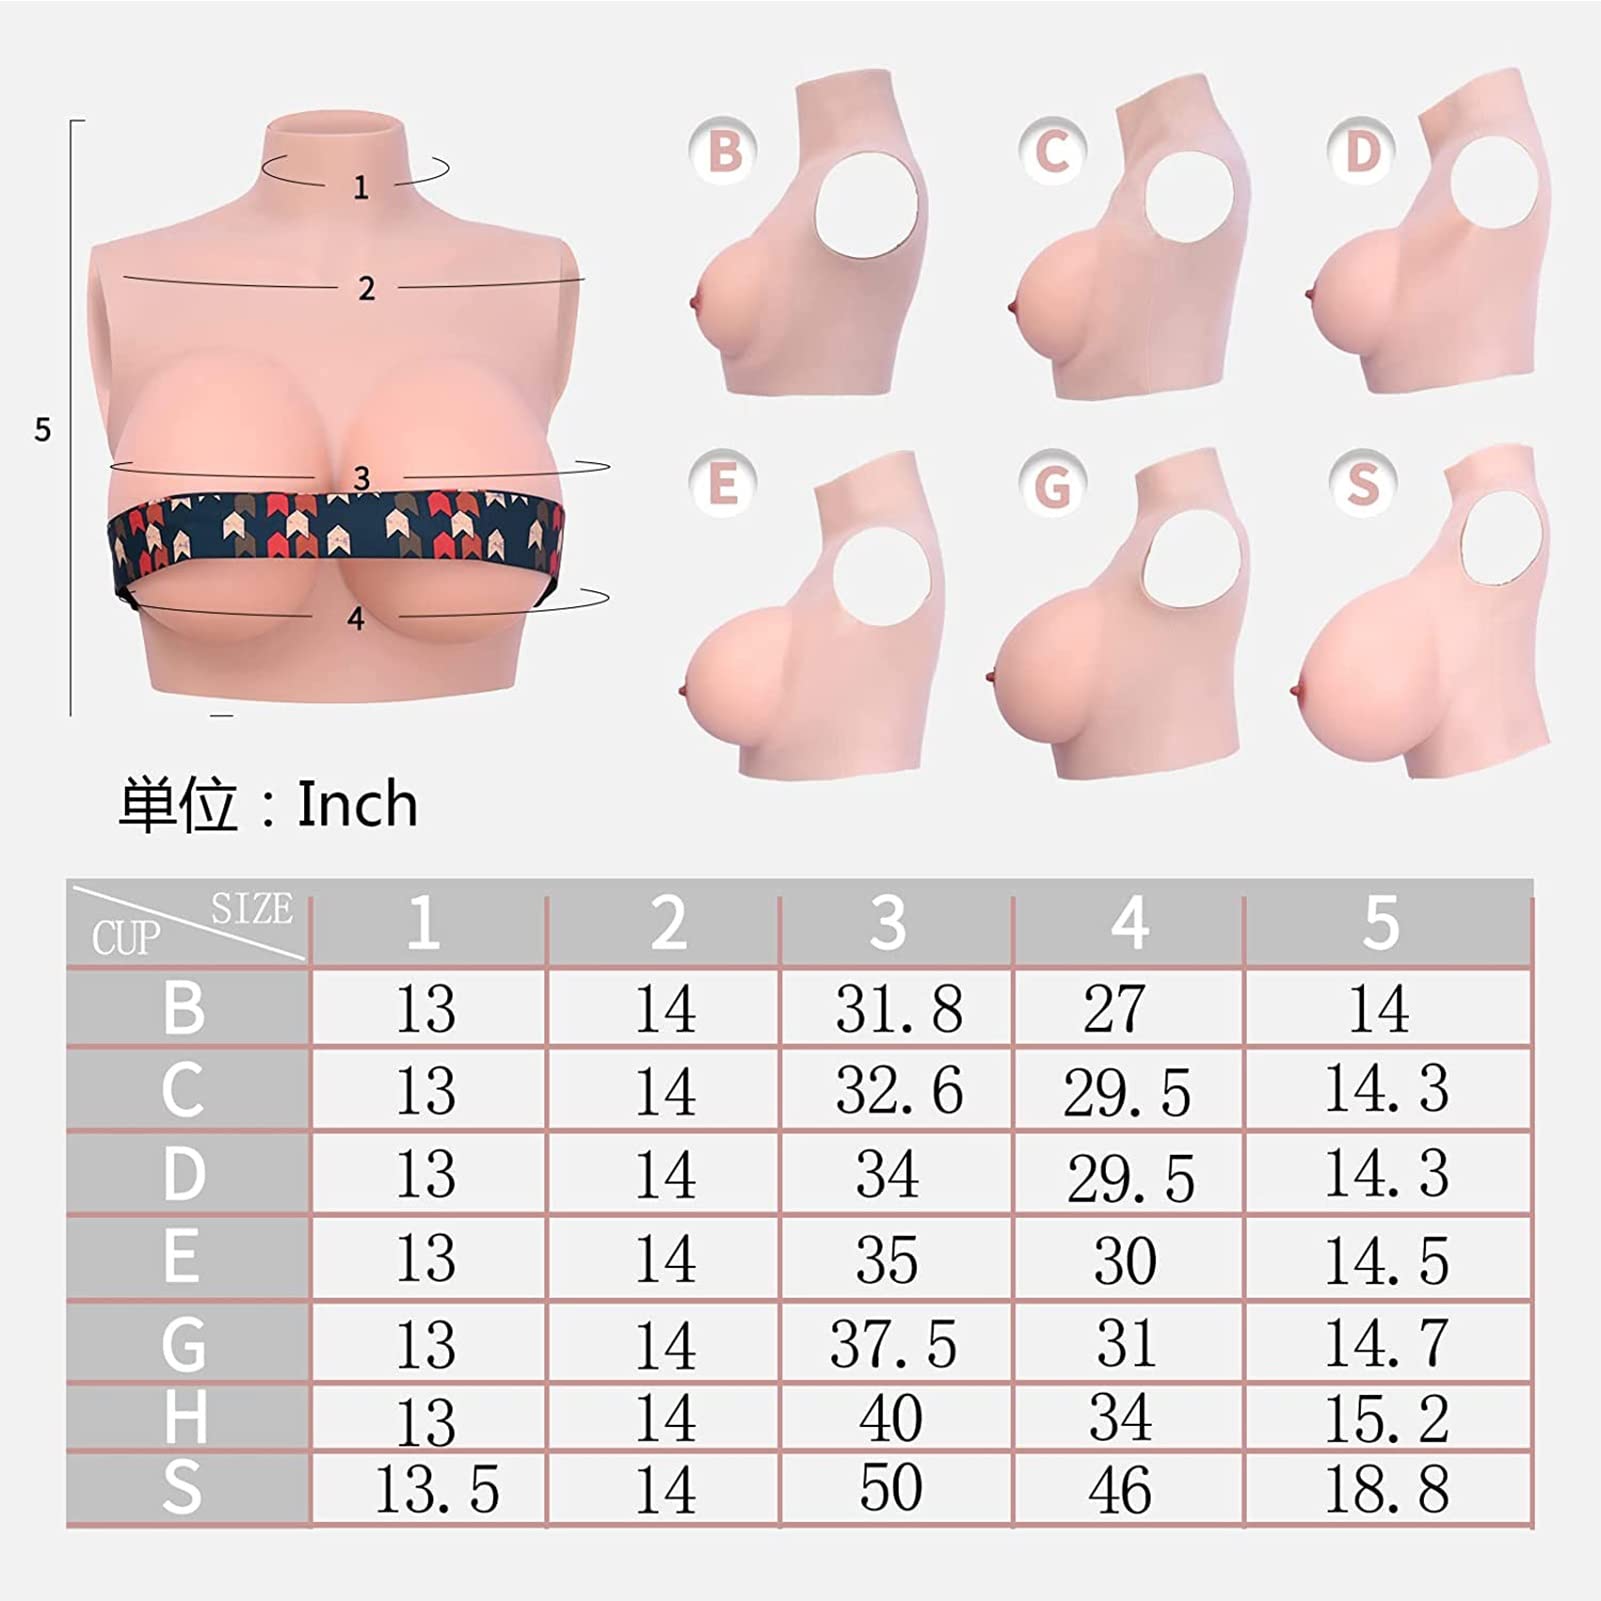 GOUTUI Silicone Breast Silicone Filled Z Cup Realistic Breast Enhancer Prosthesis Breasts Forms Breast Plate Breast Silicone for Crossdressers Prothesis Cosplay 1 Tan